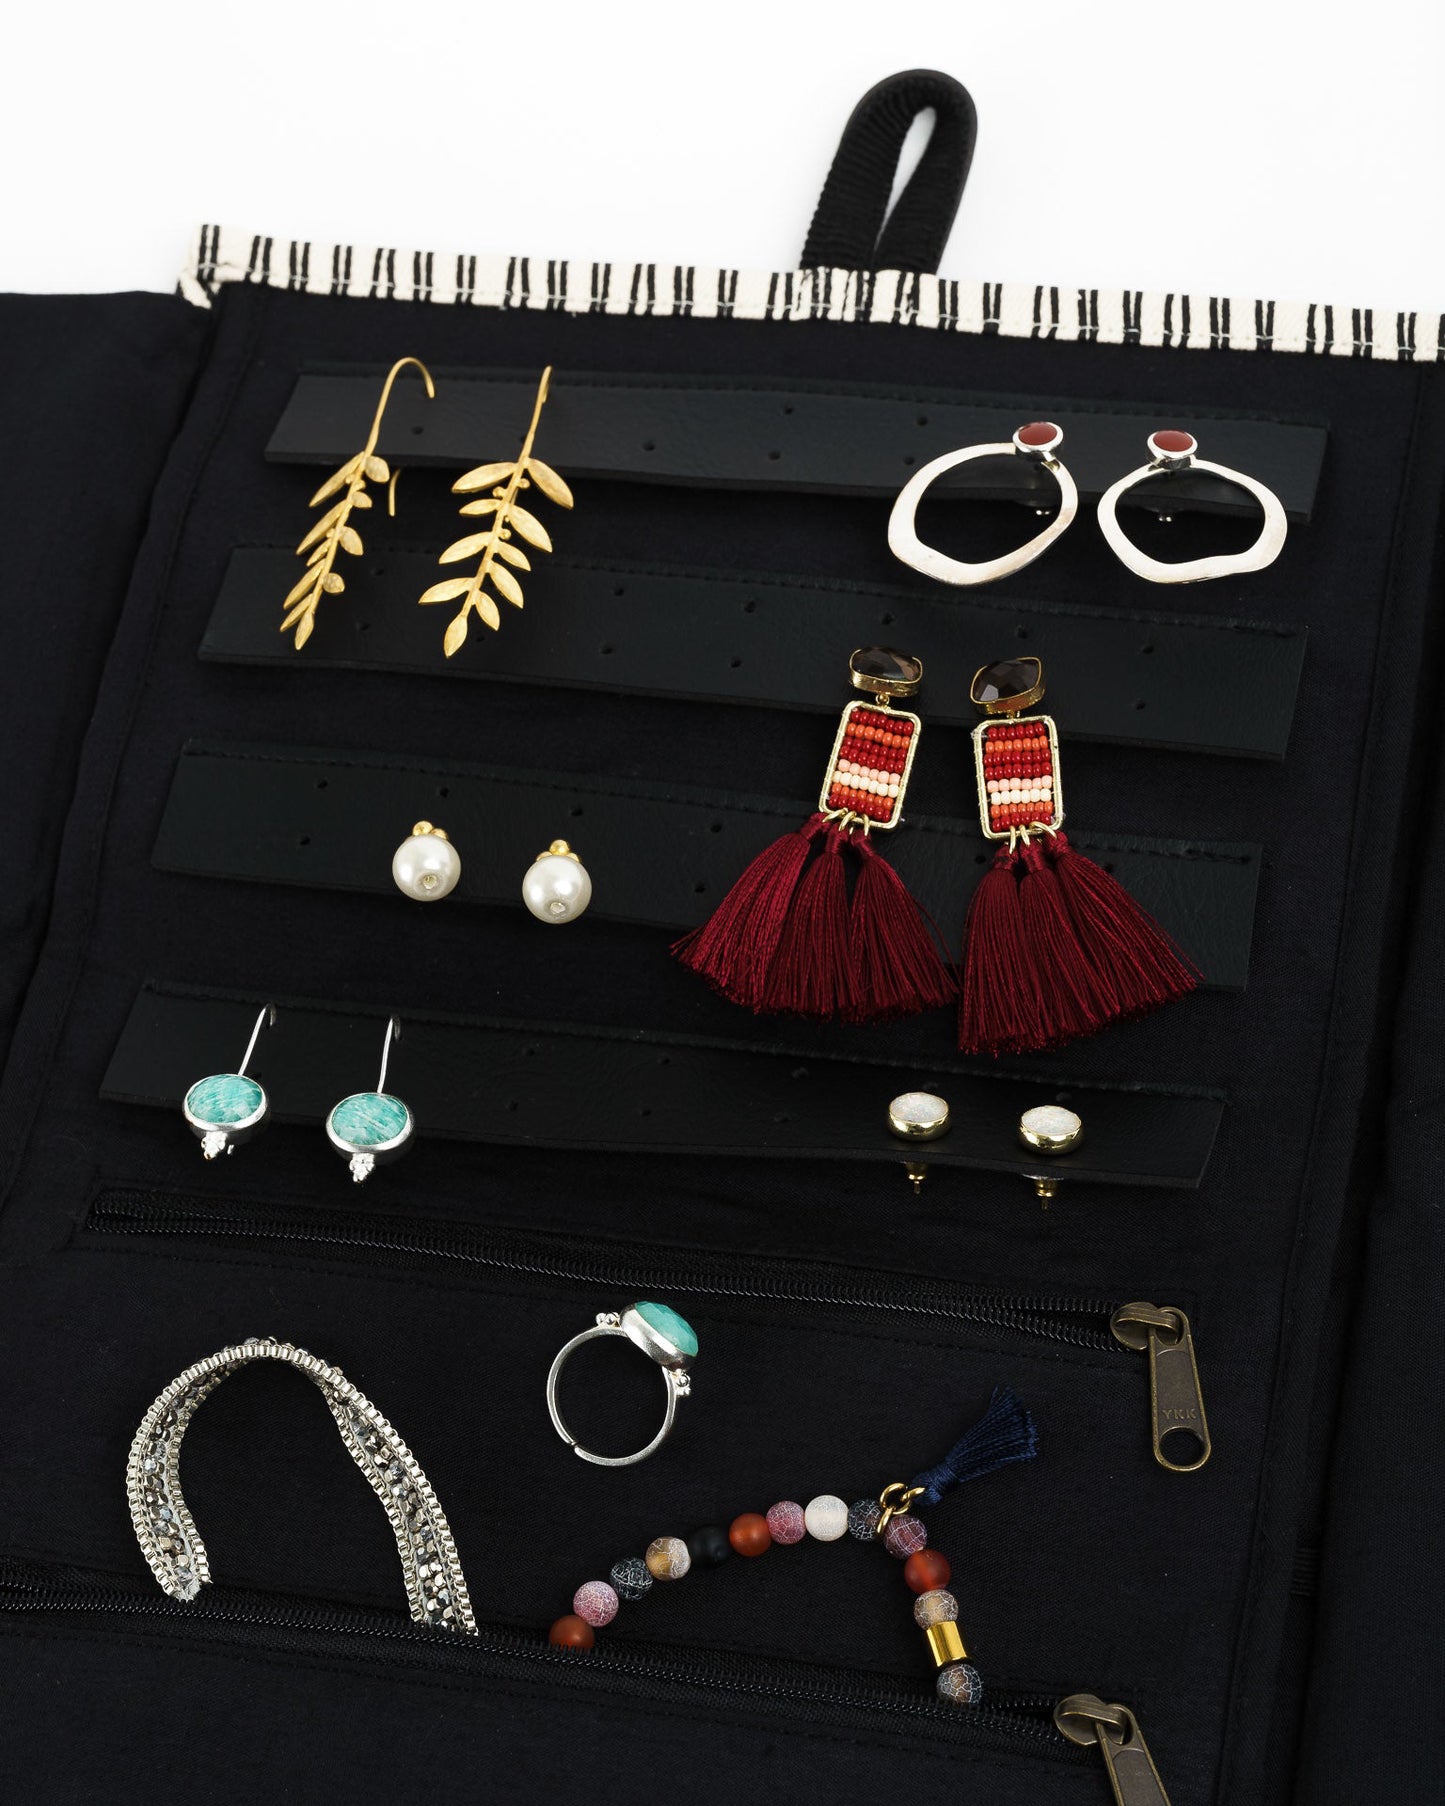 Wanderer Jewelry Case - Trades of Hope 